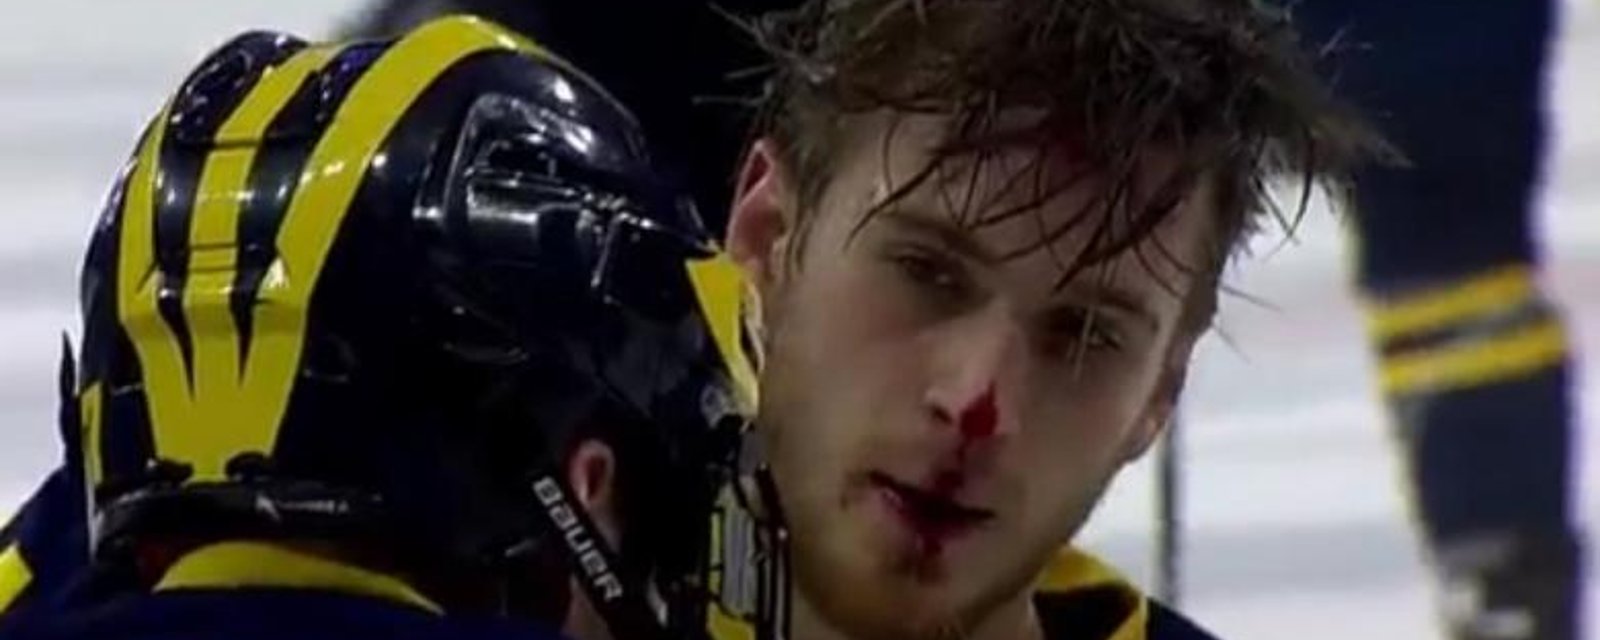 NHL prospect gets destroyed by one of the worst cheap shots you will ever see.